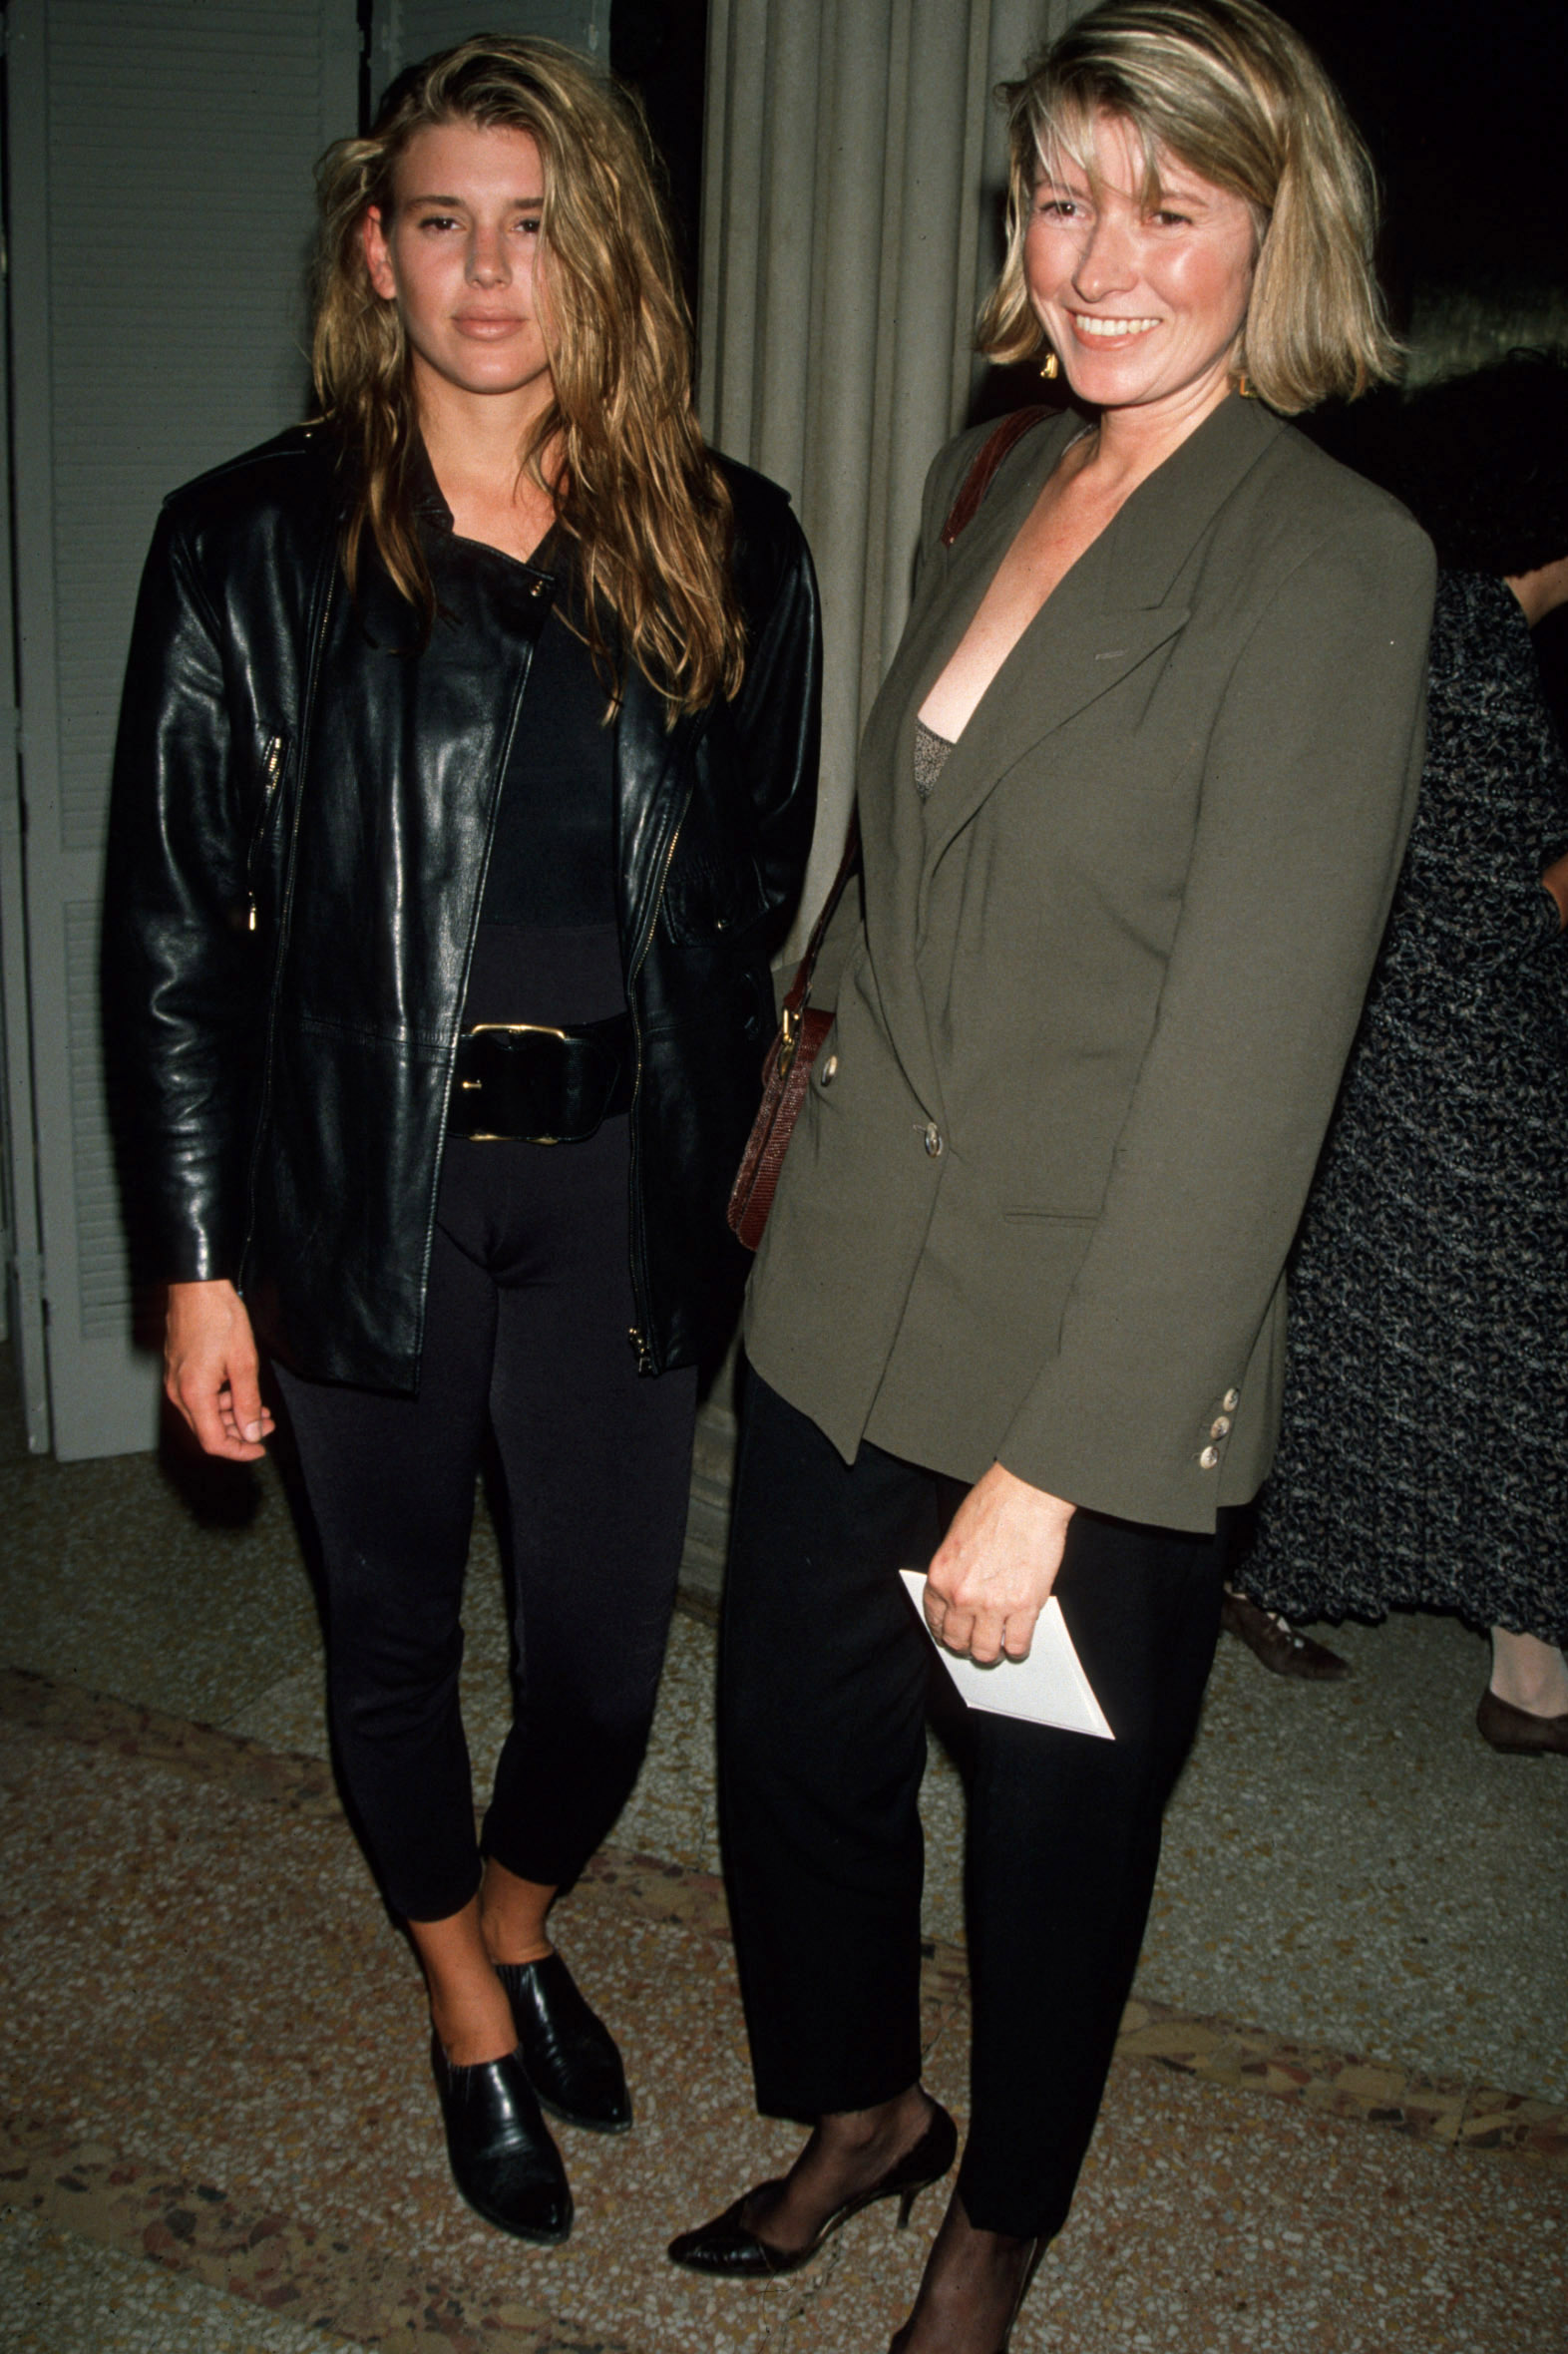 Alexis Stewart and Martha Stewart during the New York premiere of "Avalon" | Source: Getty Images